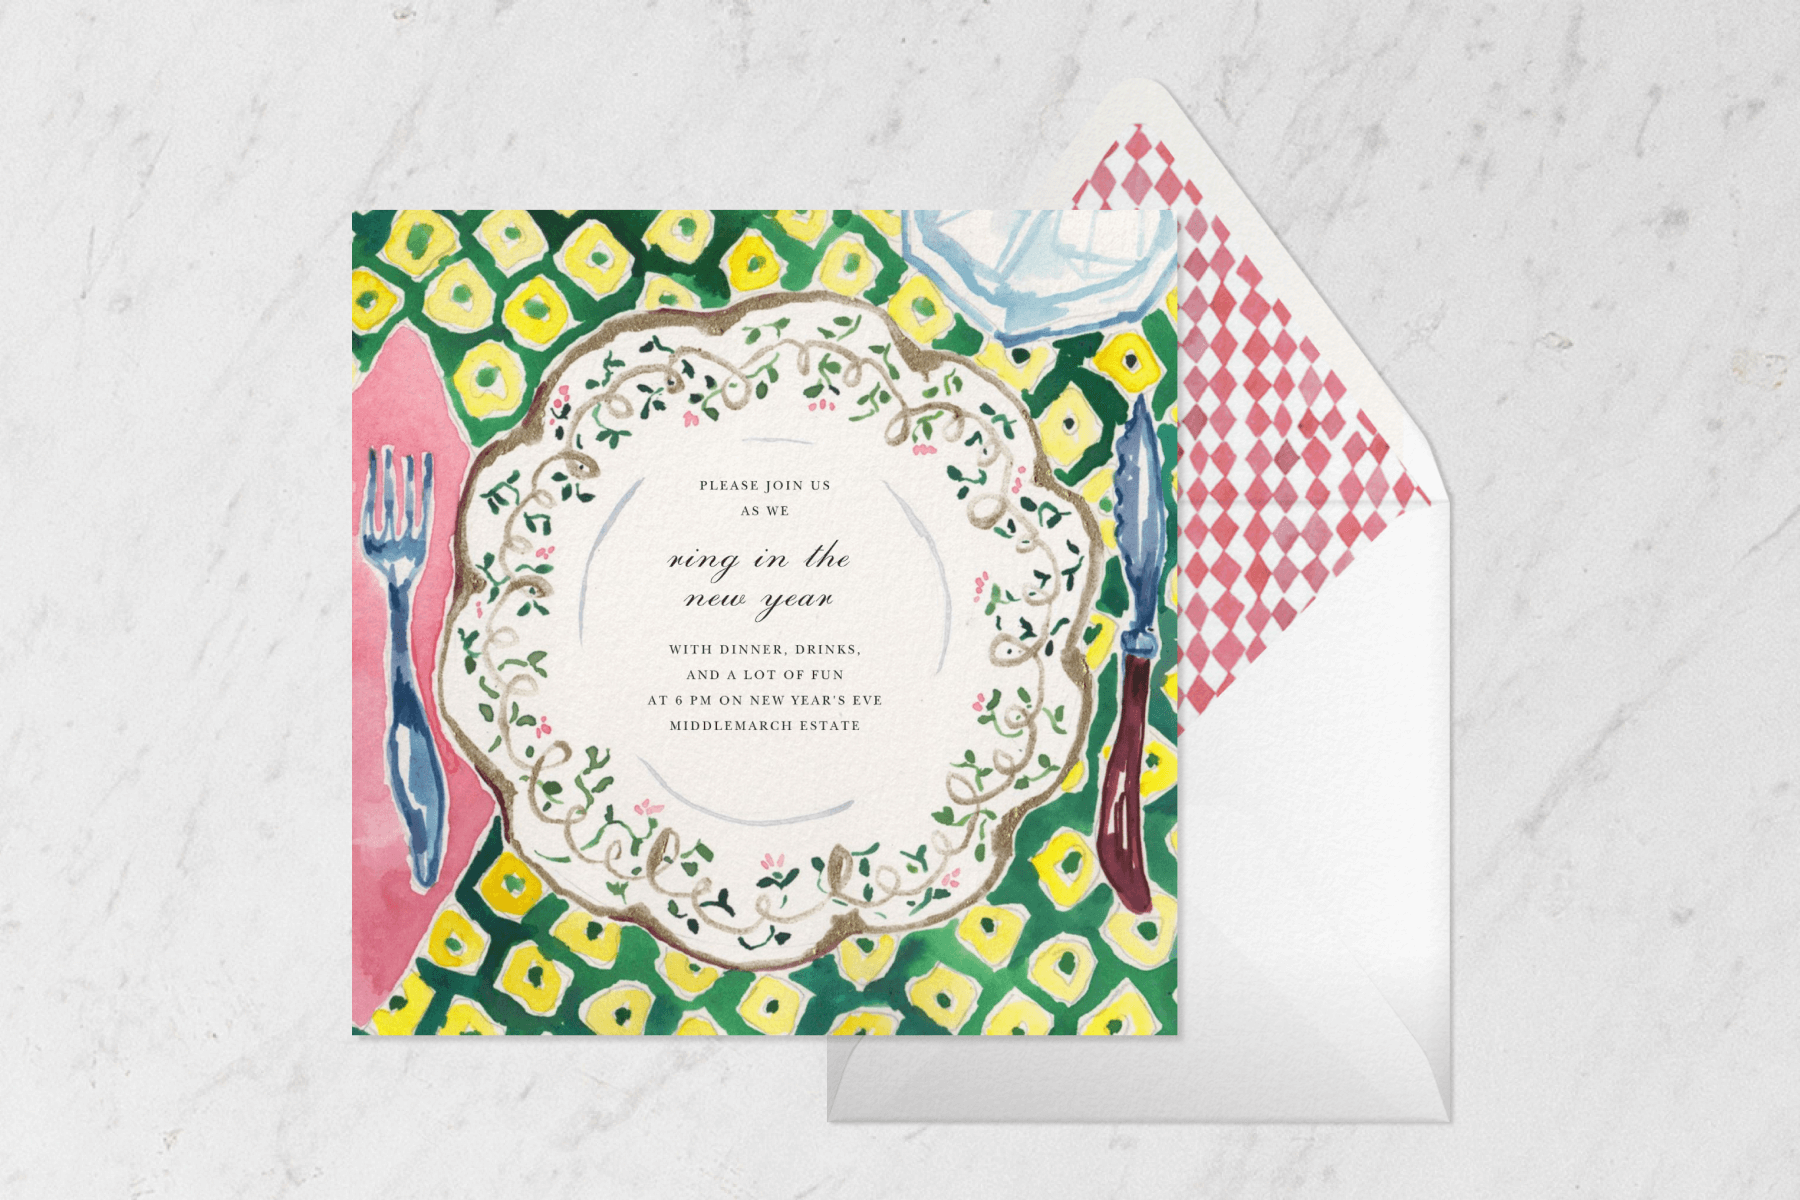 A square card with a watercolor illustration of a scalloped floral plate, fork, and knife on a green and yellow tablecloth beside a matching envelope.